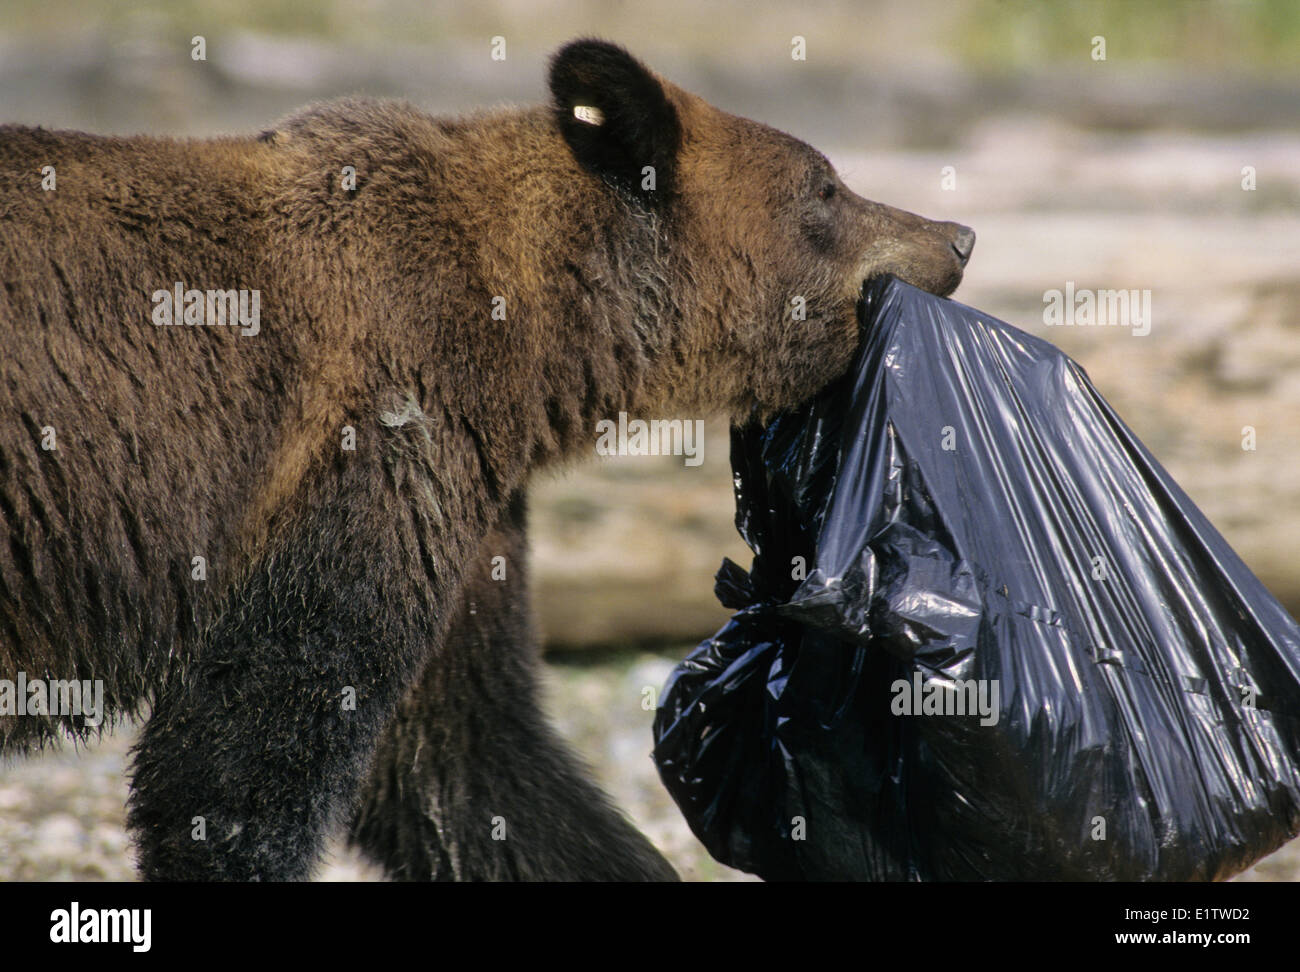 Grizzly Bear (Ursus arctos horribilis) Adult scavenging from a dump, Summer, Alaska, United States of America. Stock Photo